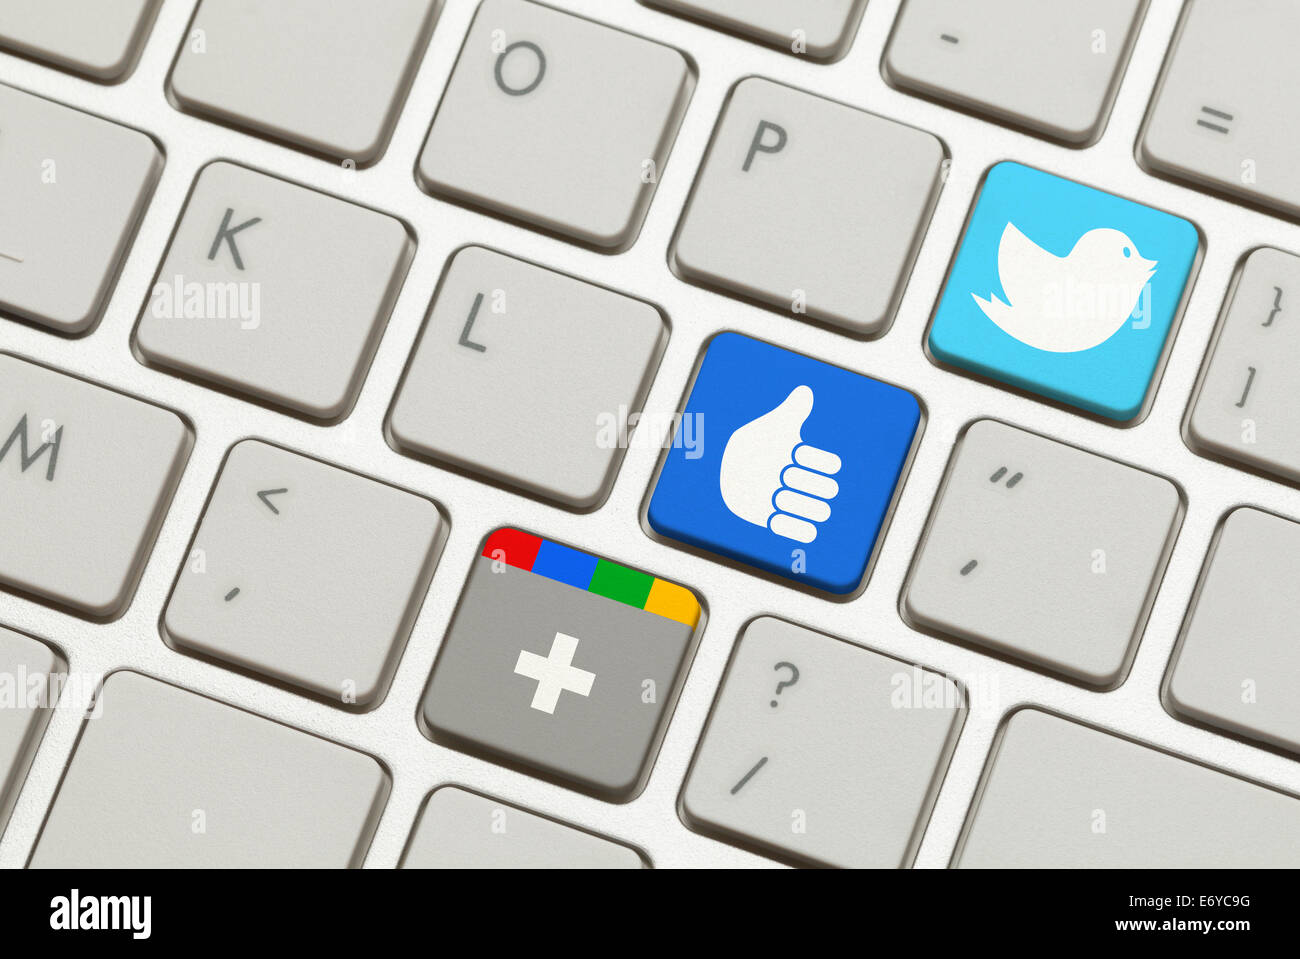 Keyboard with Popular Social Networking Launch Keys. Stock Photo